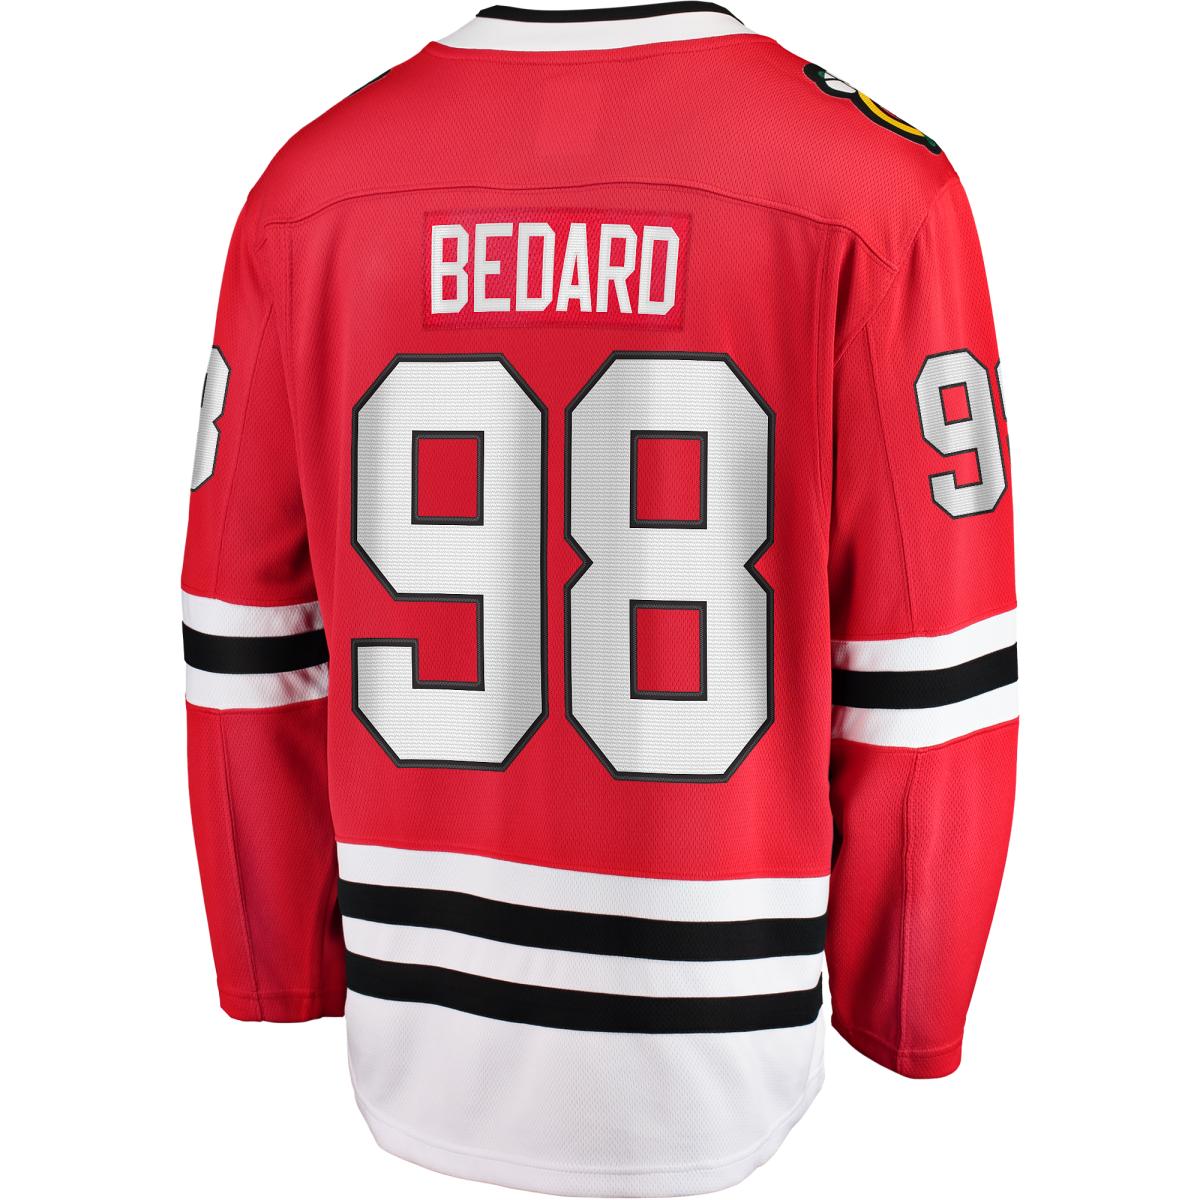 Connor Bedard Chicago Blackhawks jersey: How to get NHL Draft 2023